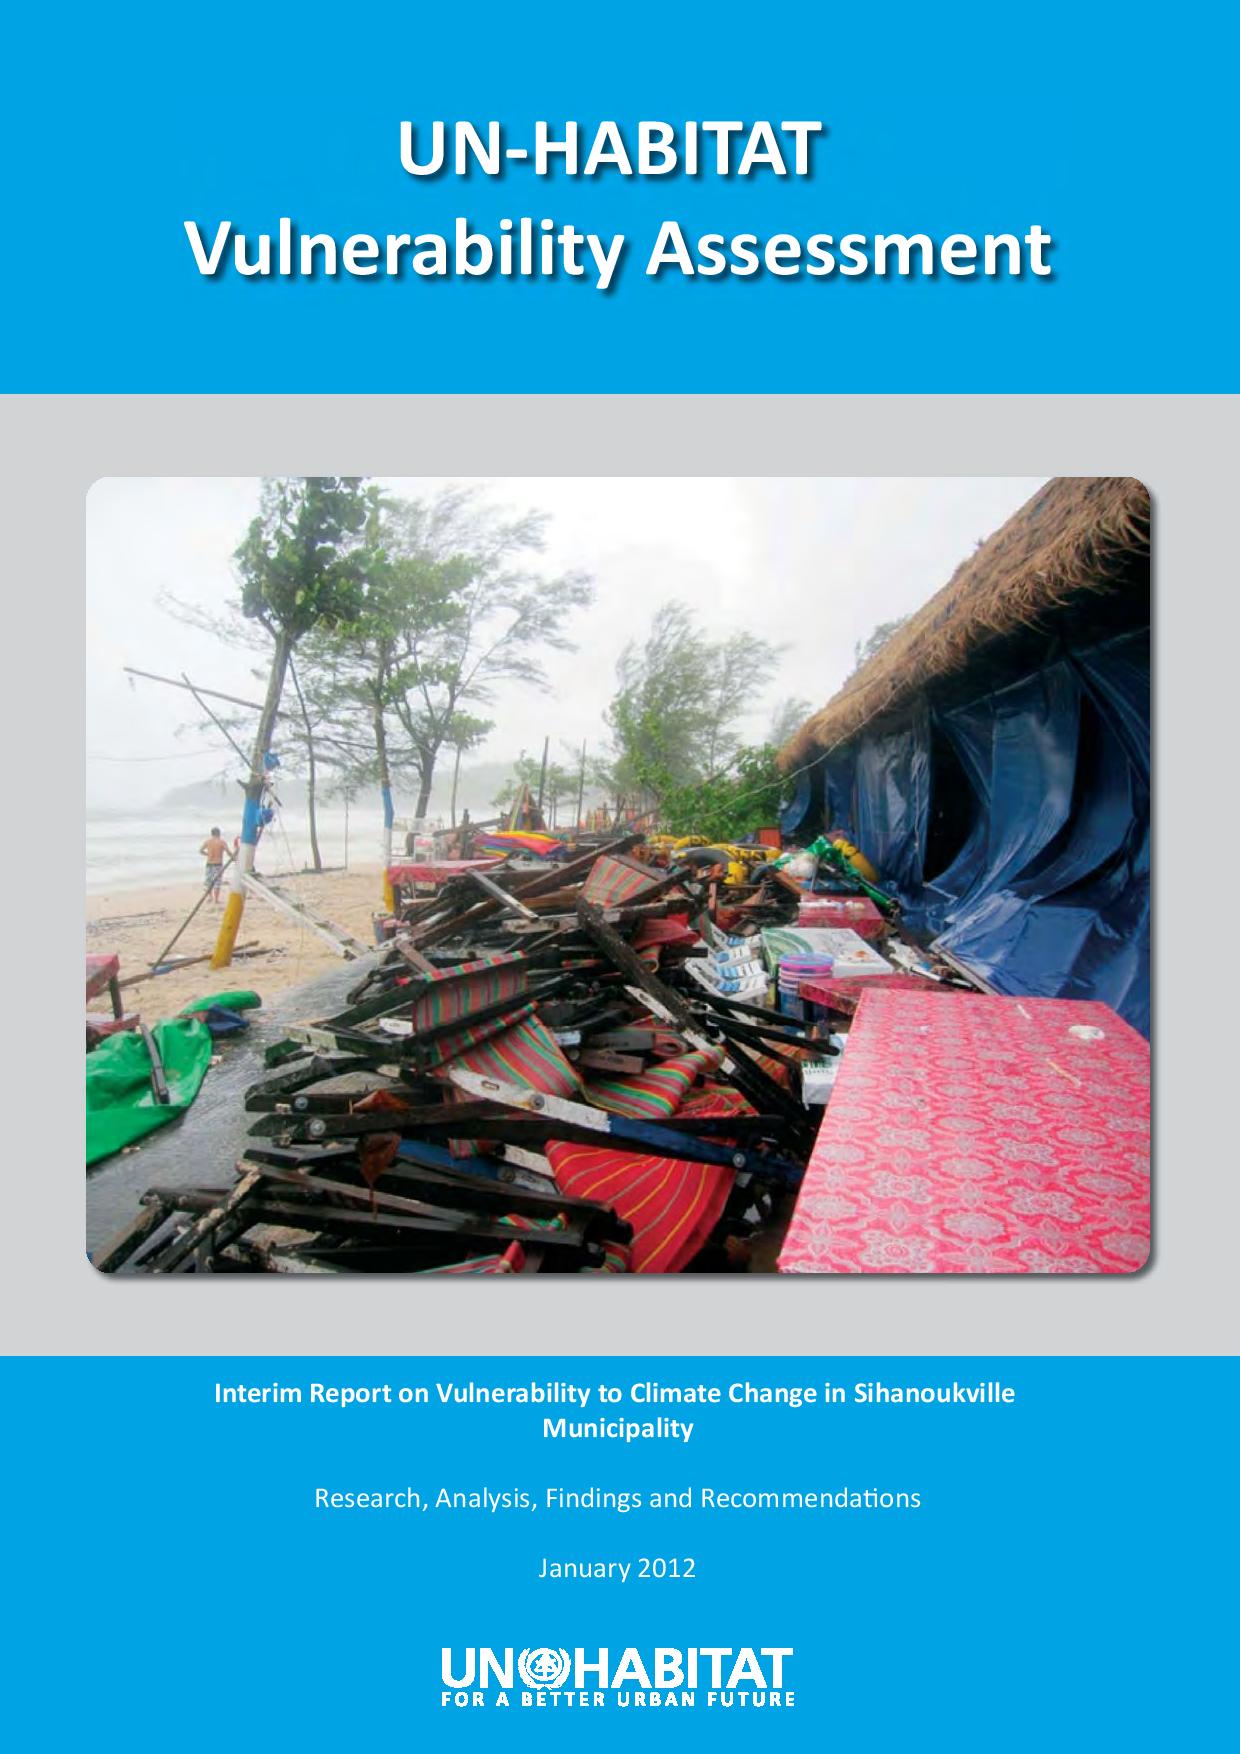 Interim Report on Vulnerability to Climate Change in Sihanoukville Municipality (January 2012) – CCCI